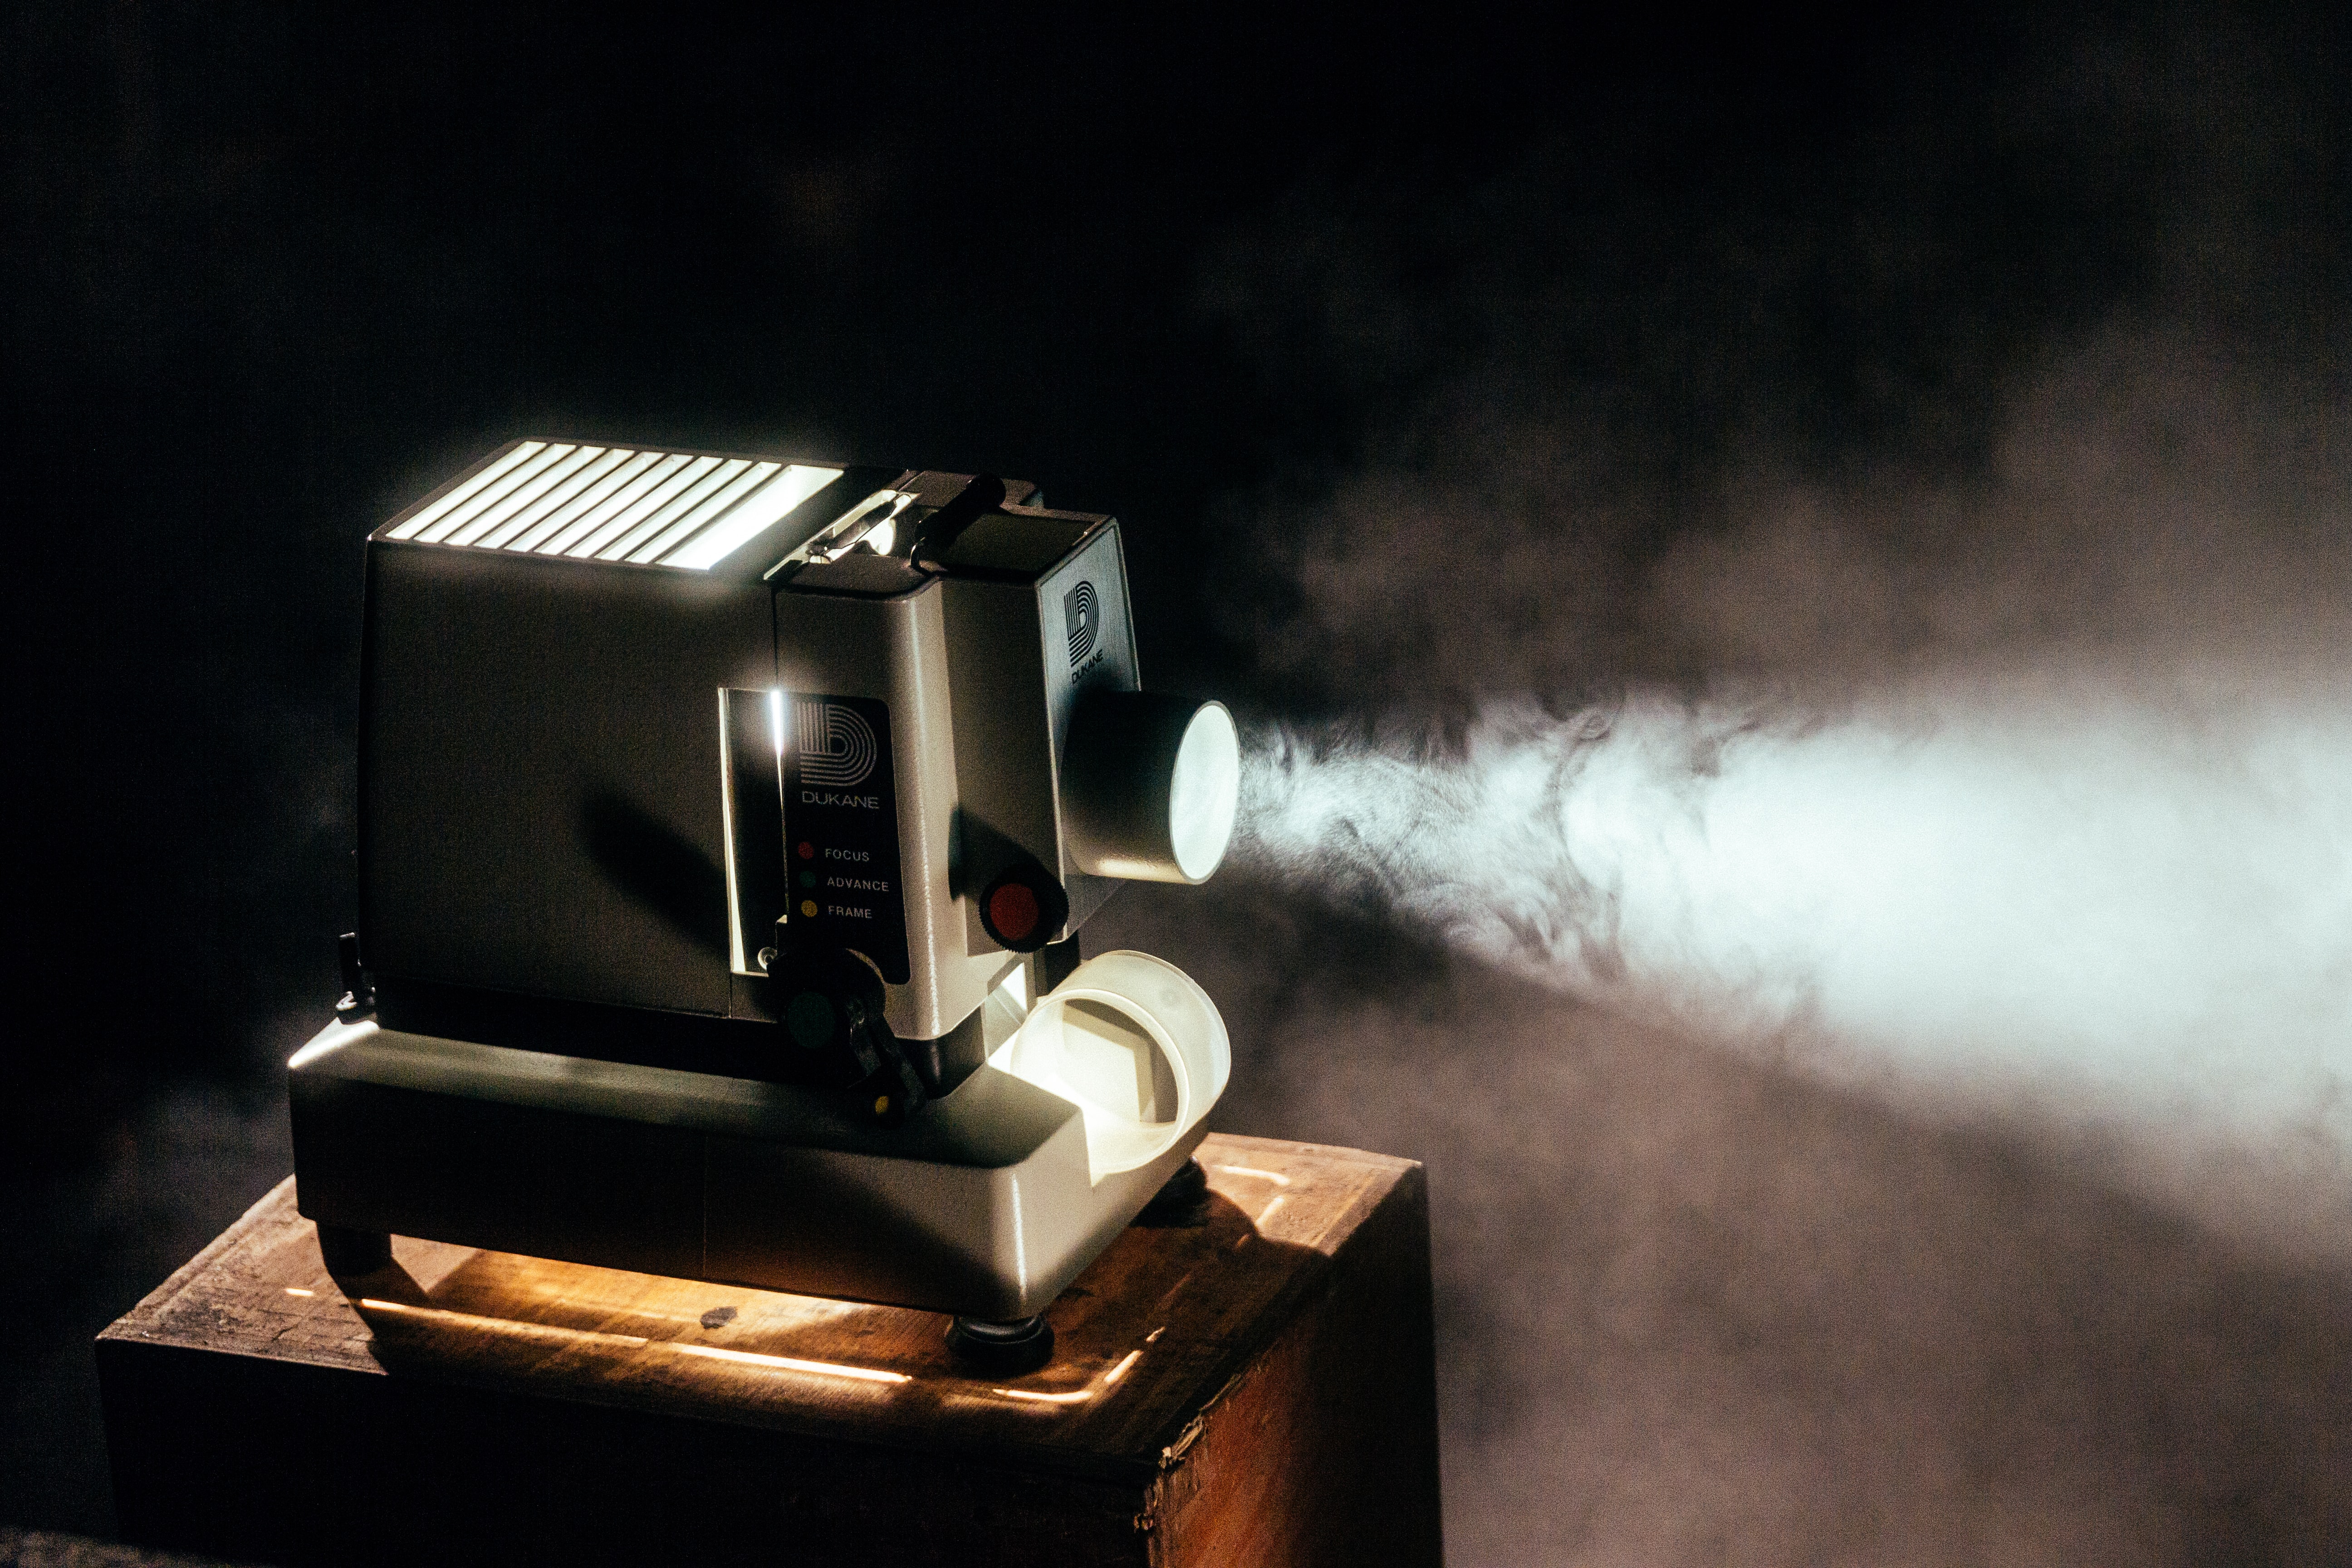 A film projector in a dark room with light being projected